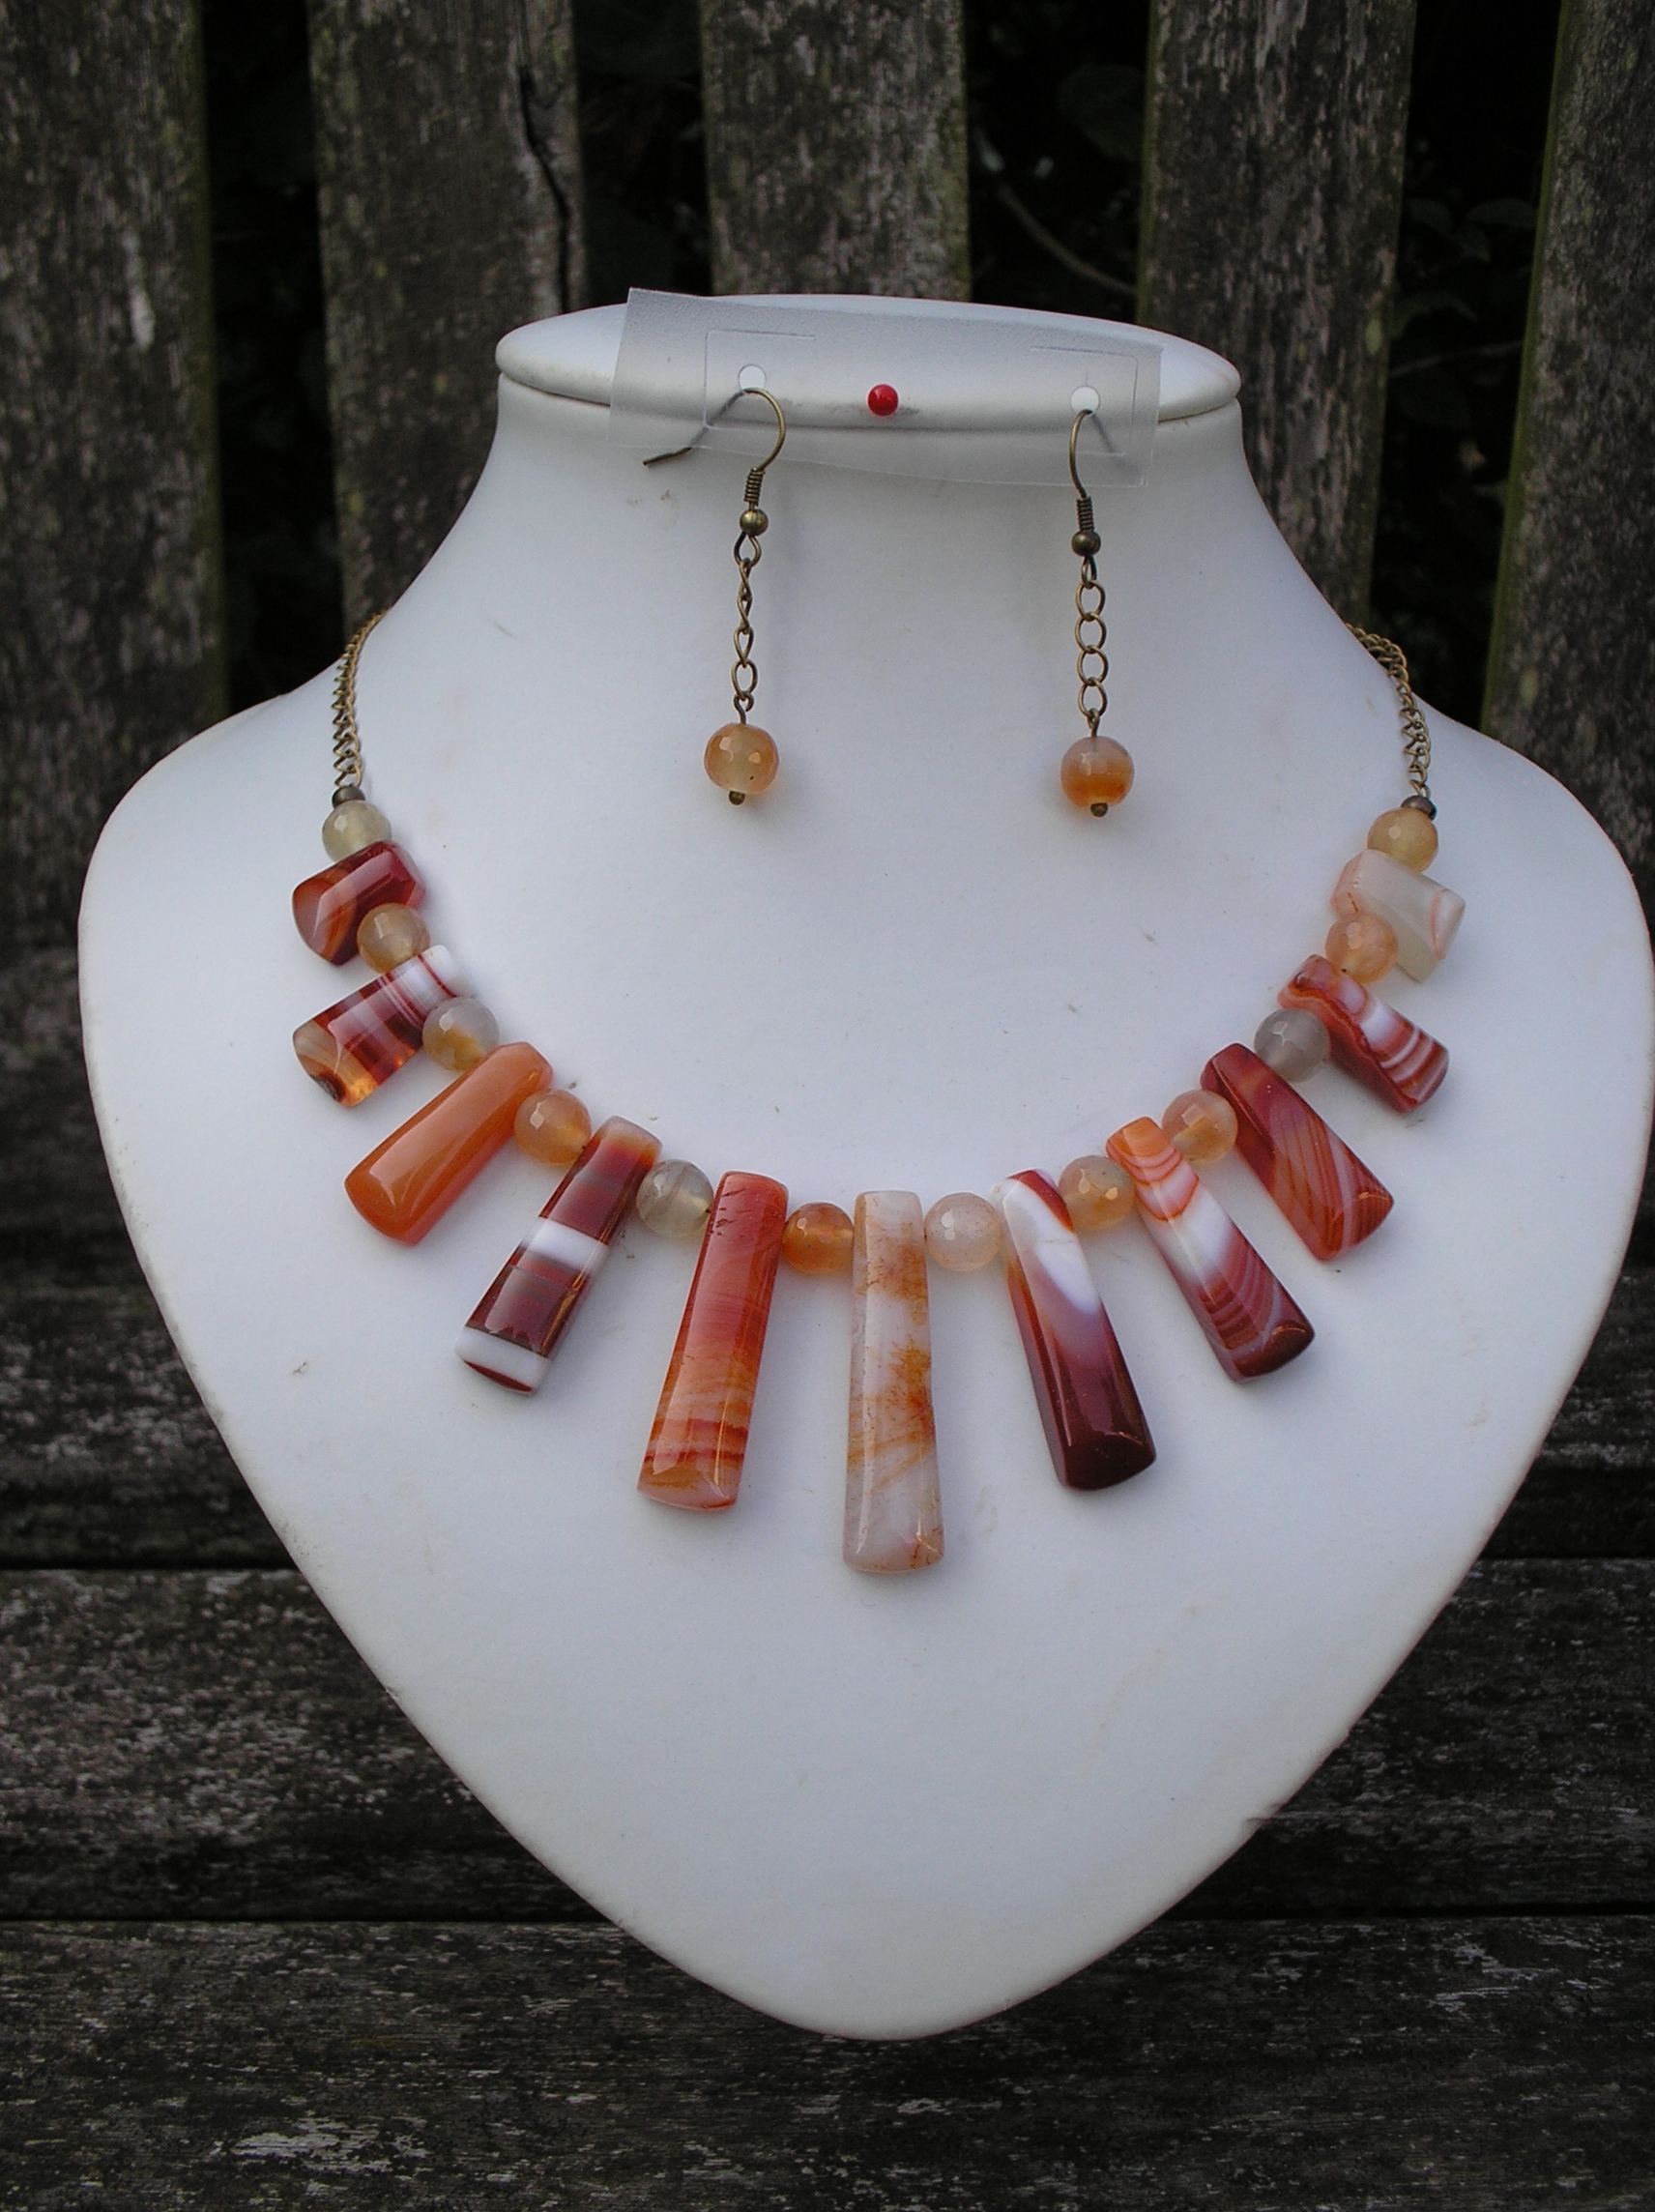 Agate and carnelian necklace and earrings